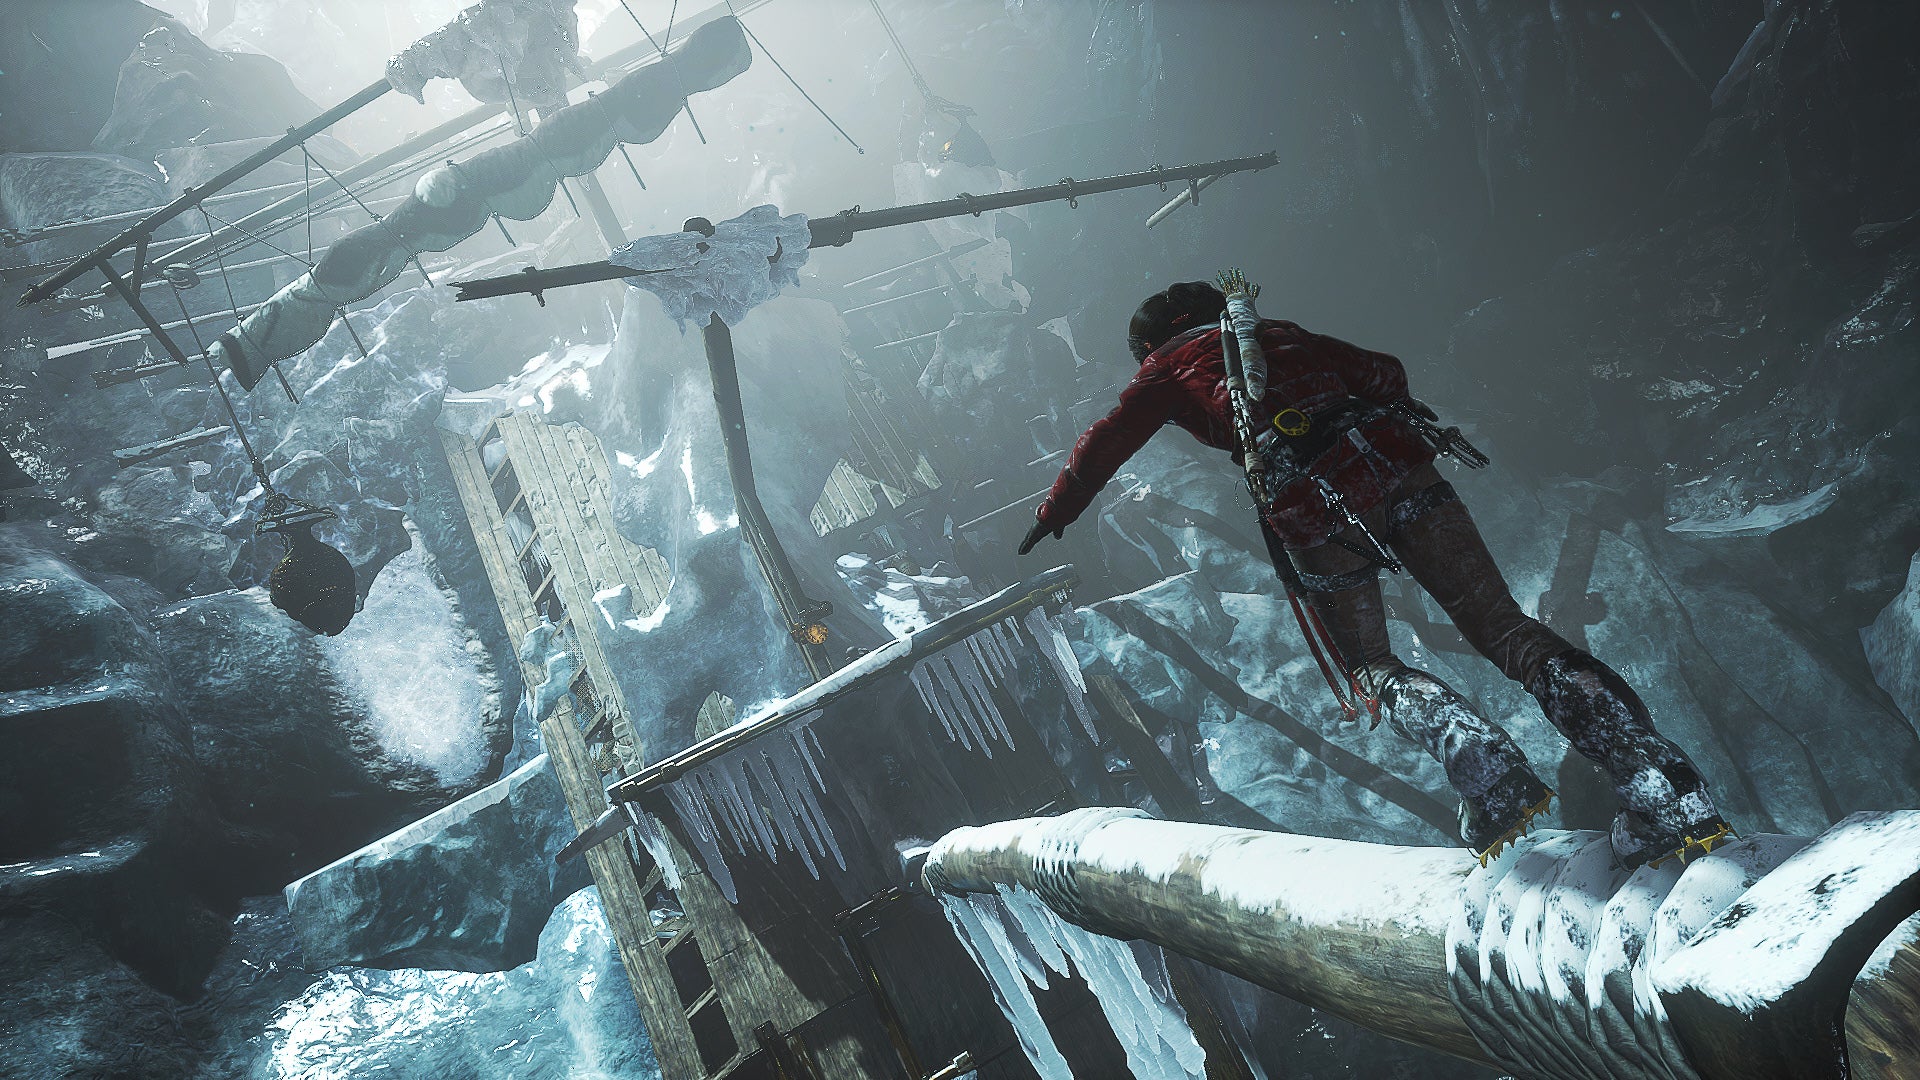 Image for Get Rise of the Tomb Raider on PC for $12 with the new Humble Monthly